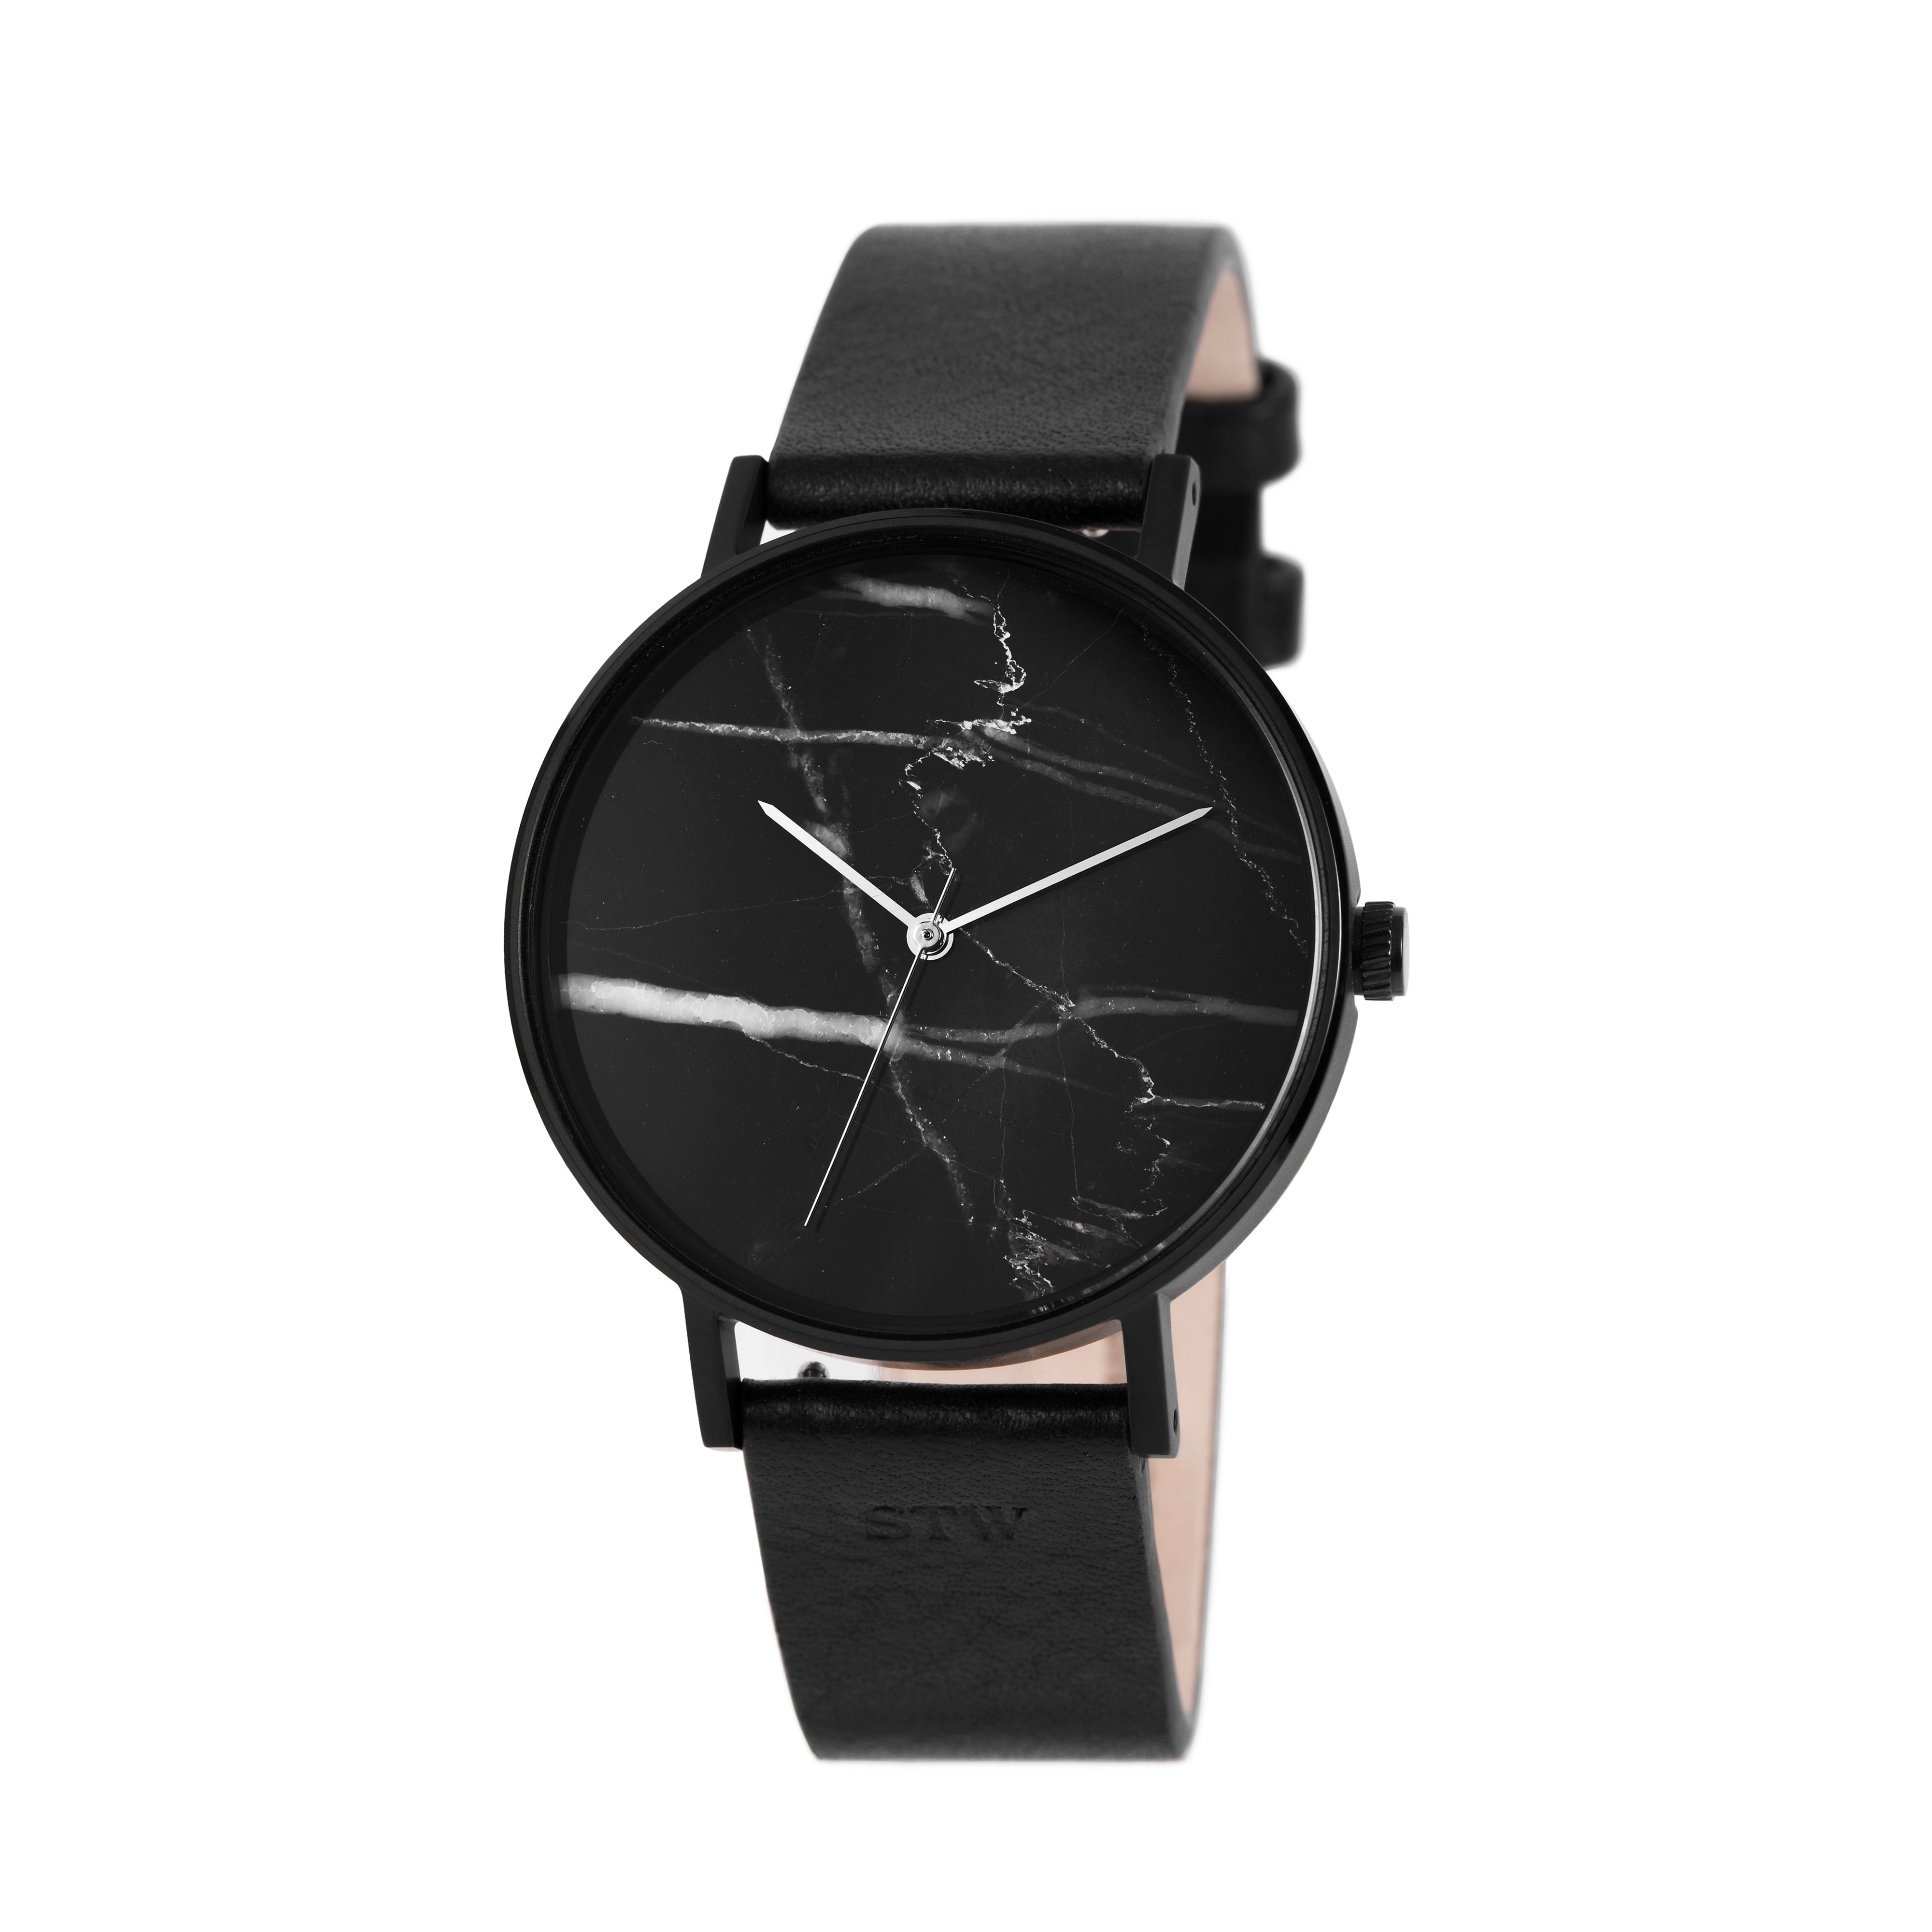 THE STONE -  BLACK ONYX DIAL WITH BLACK LEATHER STRAP WATCH